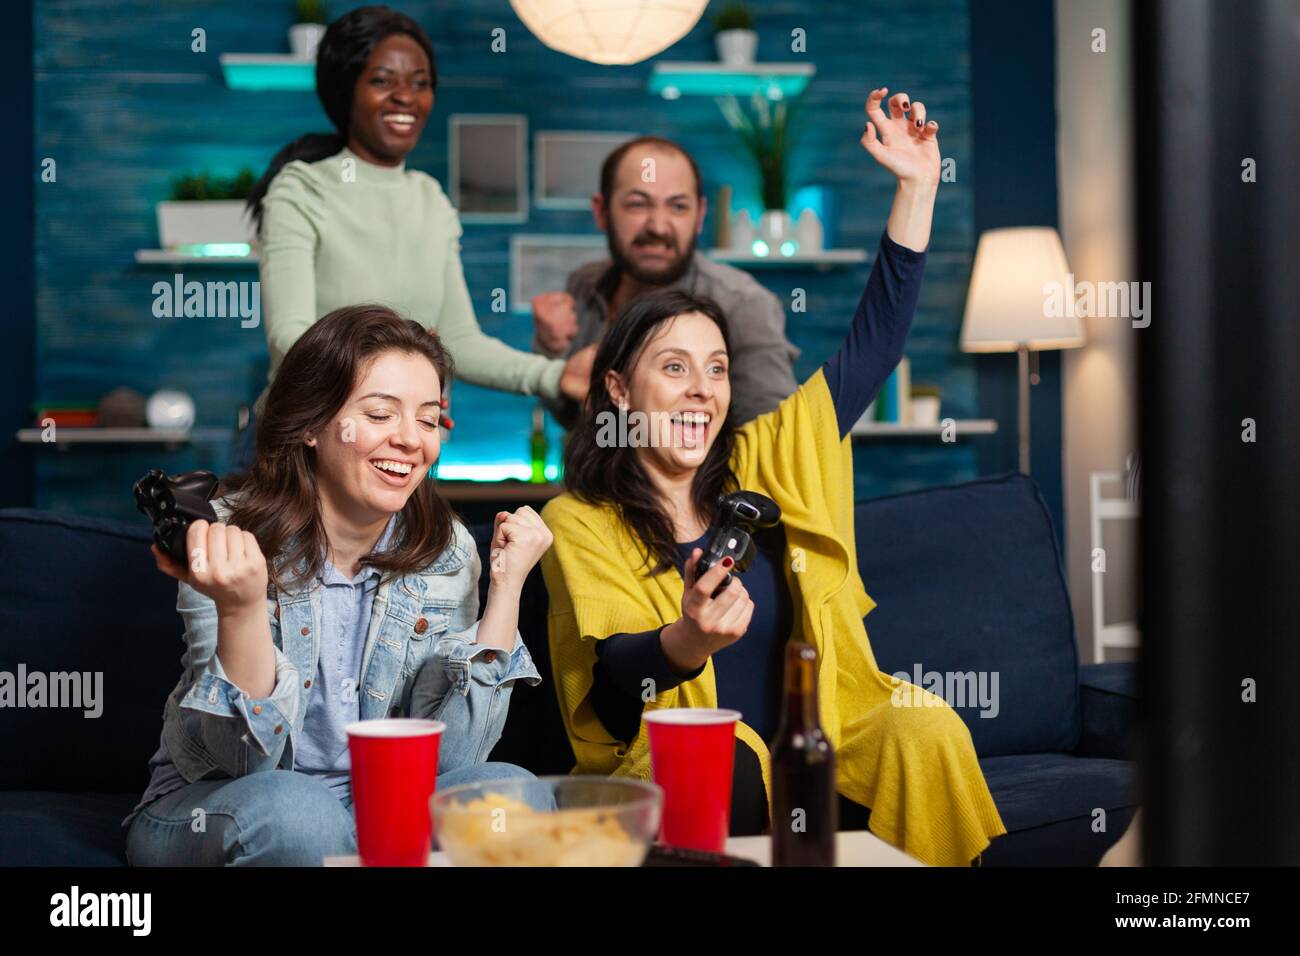 Cheerful women celebrating victory while playing video games with friends using wireless controller. Group of mixed race friends playing games while sitting on sofa in living room late at night. Stock Photo